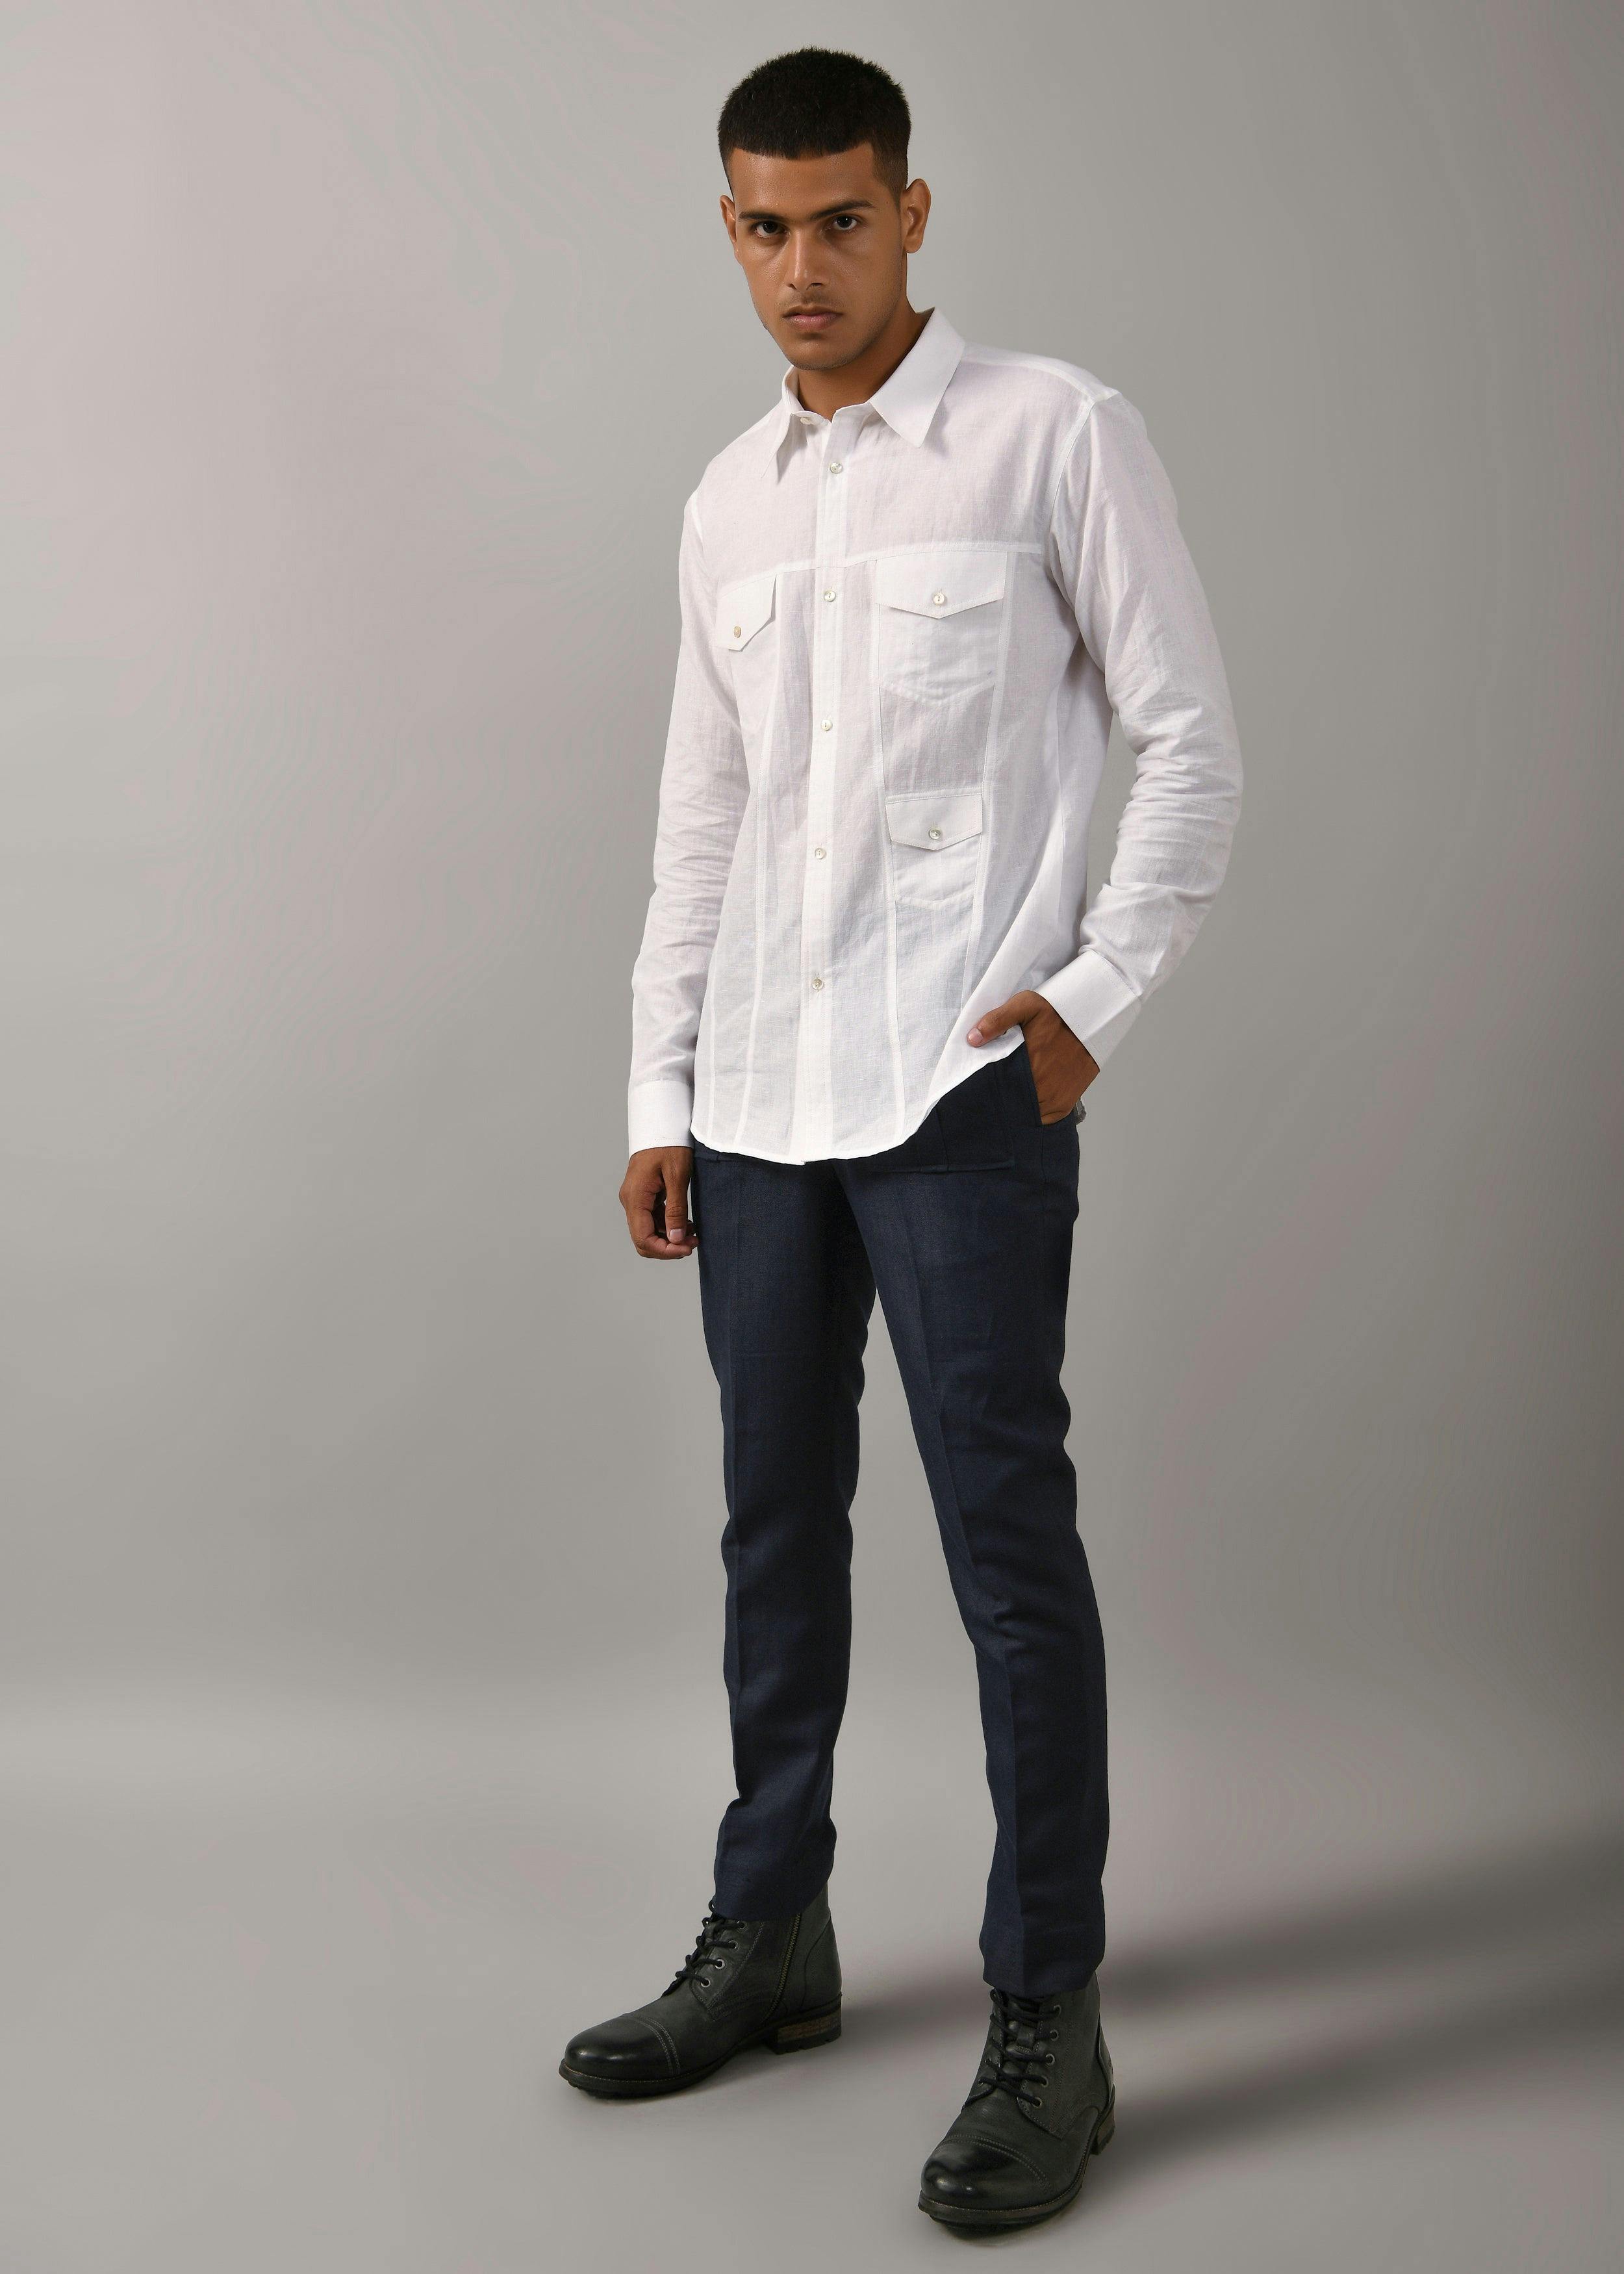 Classic 3 pocket Shirt, a product by Country Made